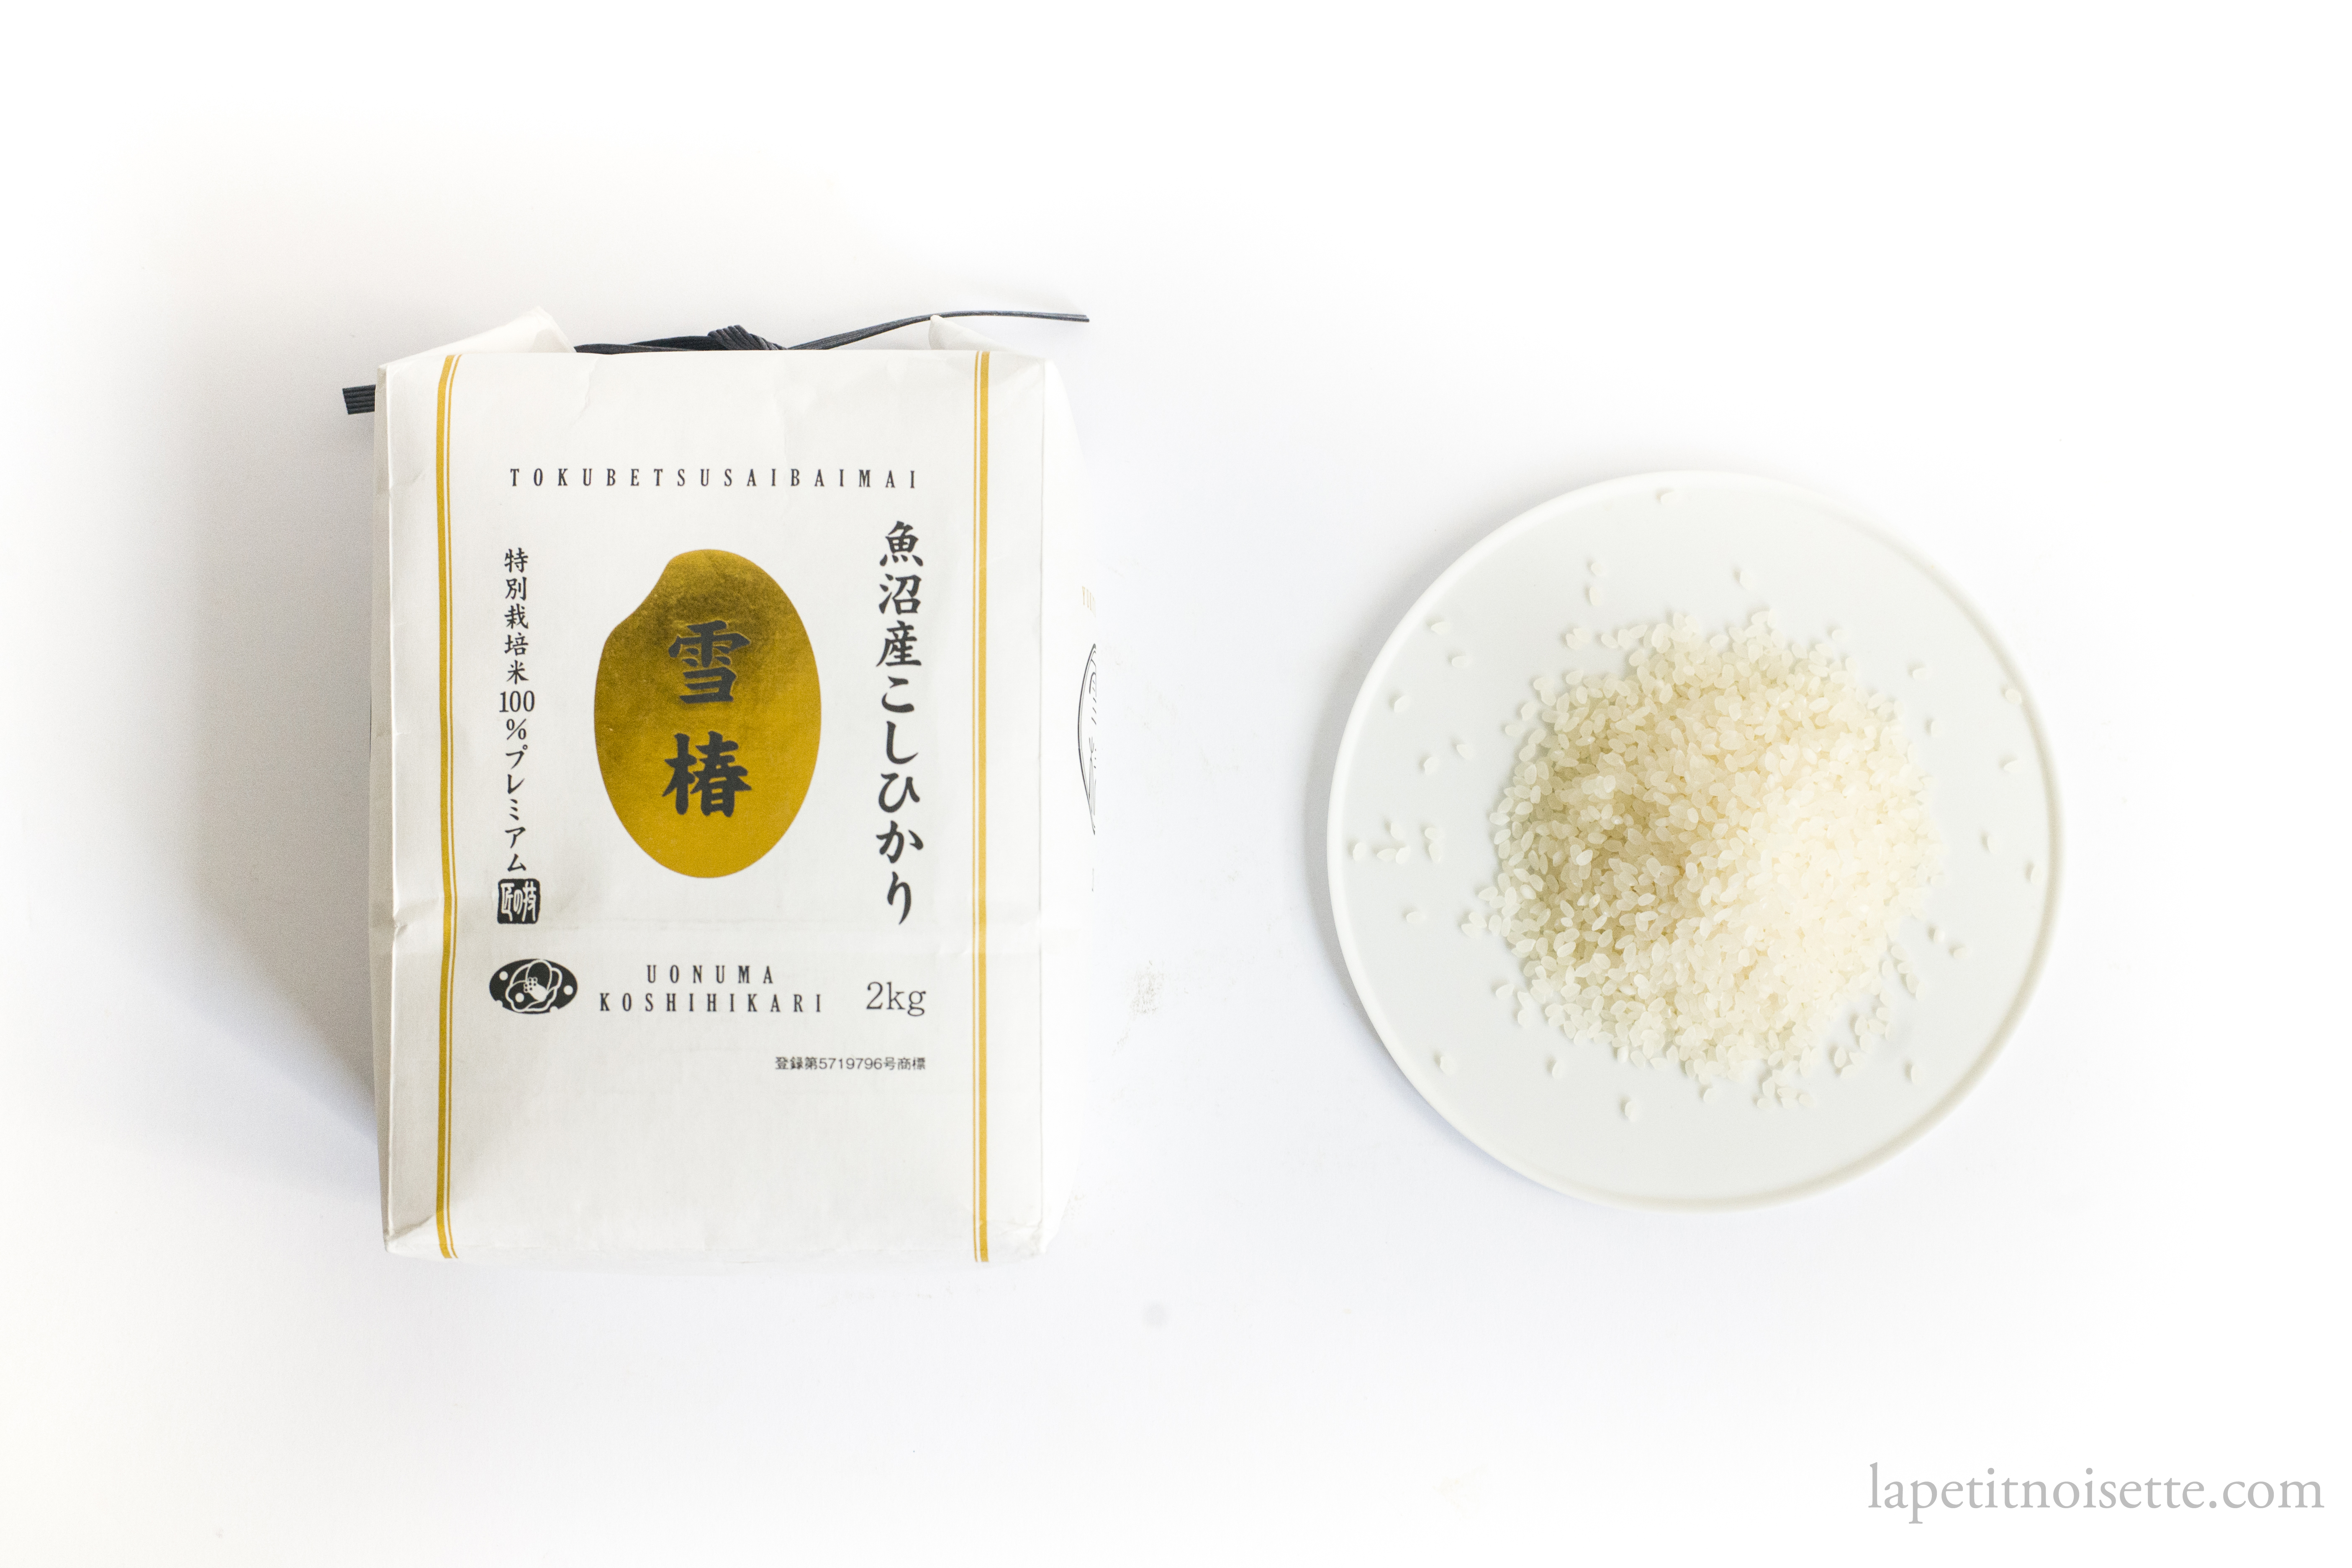 Yukitsubaki rice from Niigata Prefecture grown with water from melted snow in the mountains. 